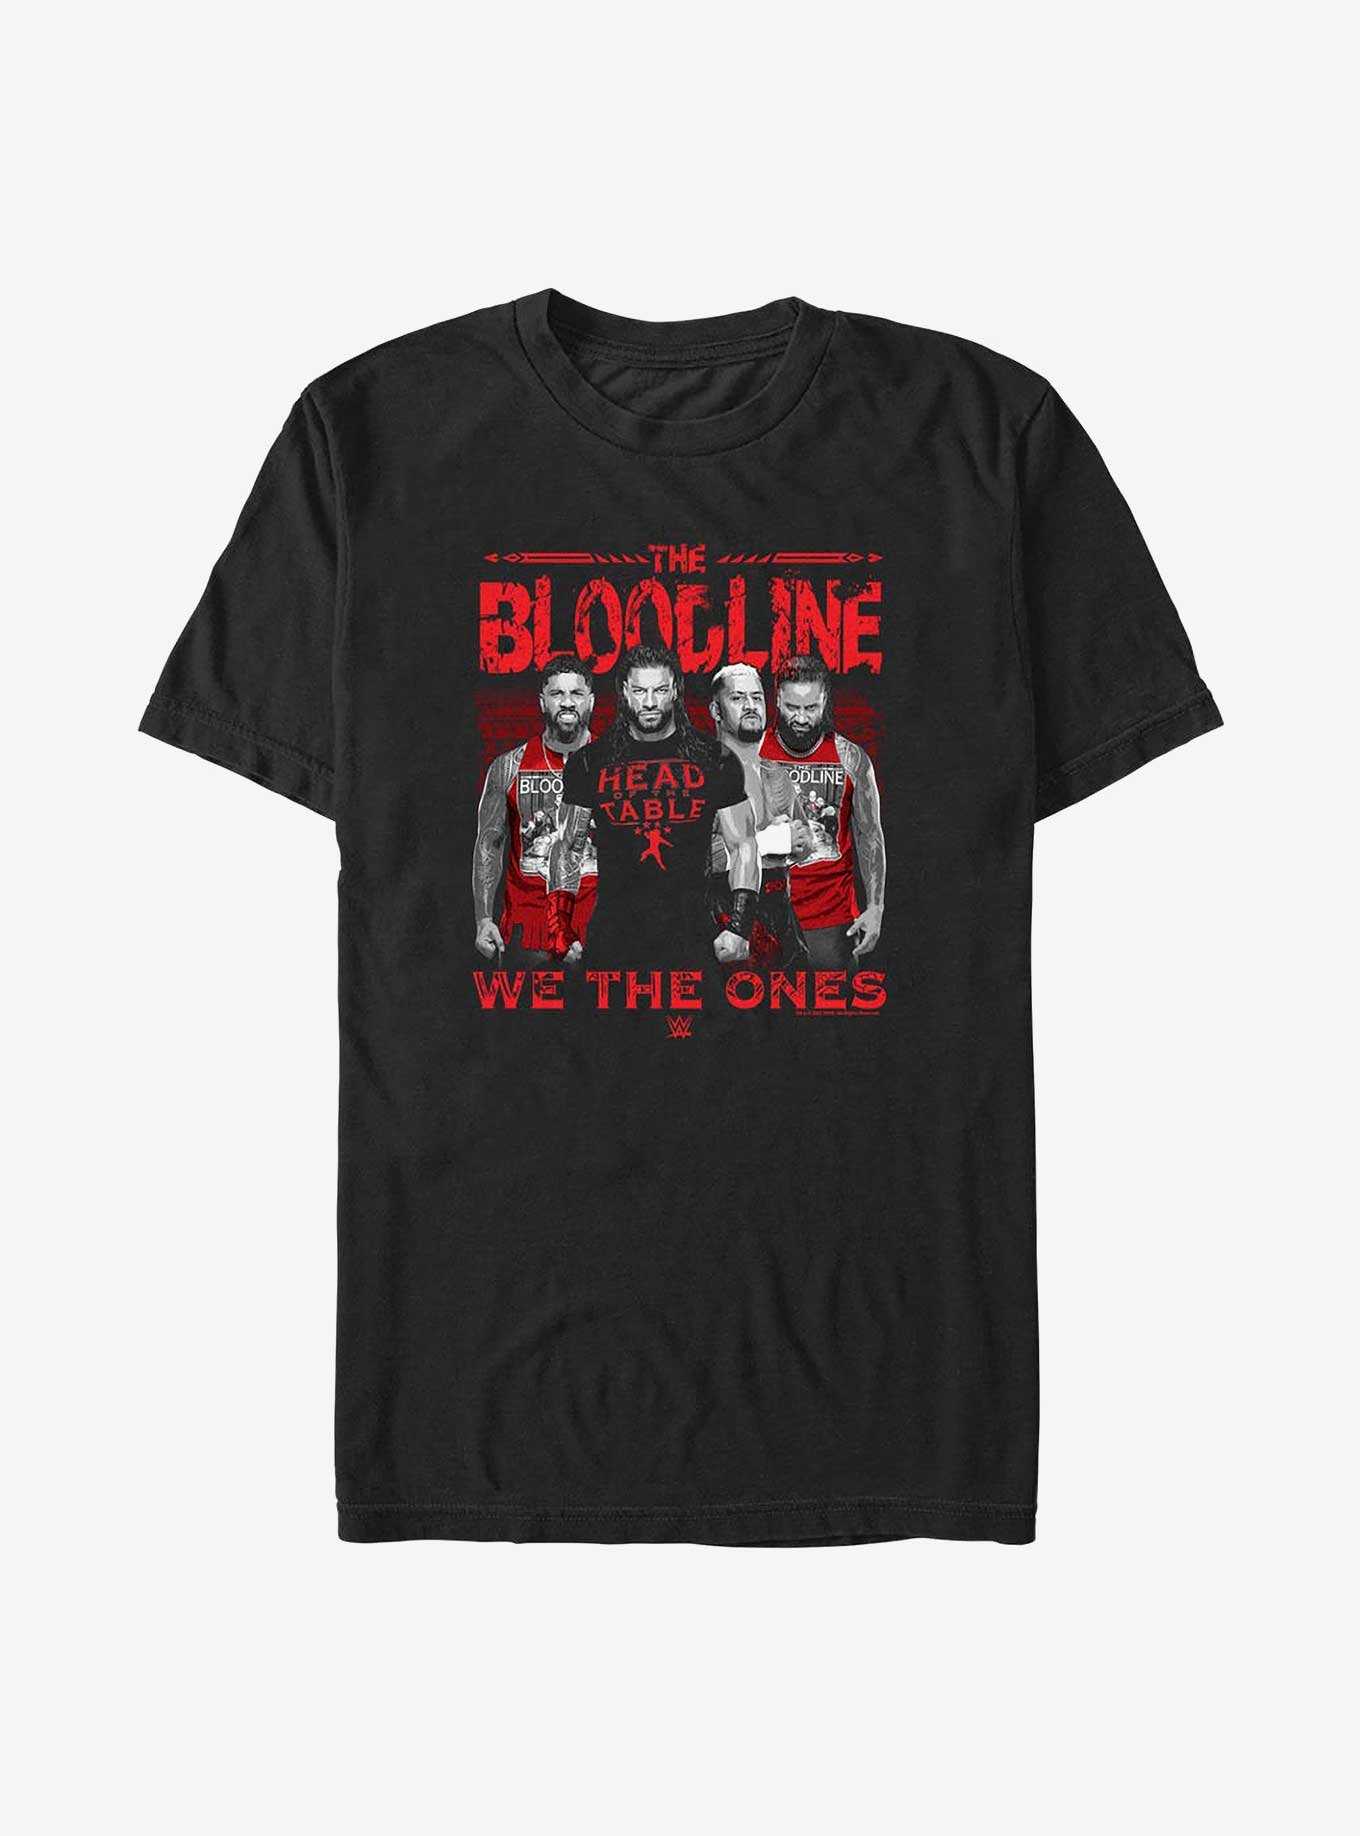 WWE The Blooodline We The Ones Group T-Shirt, , hi-res